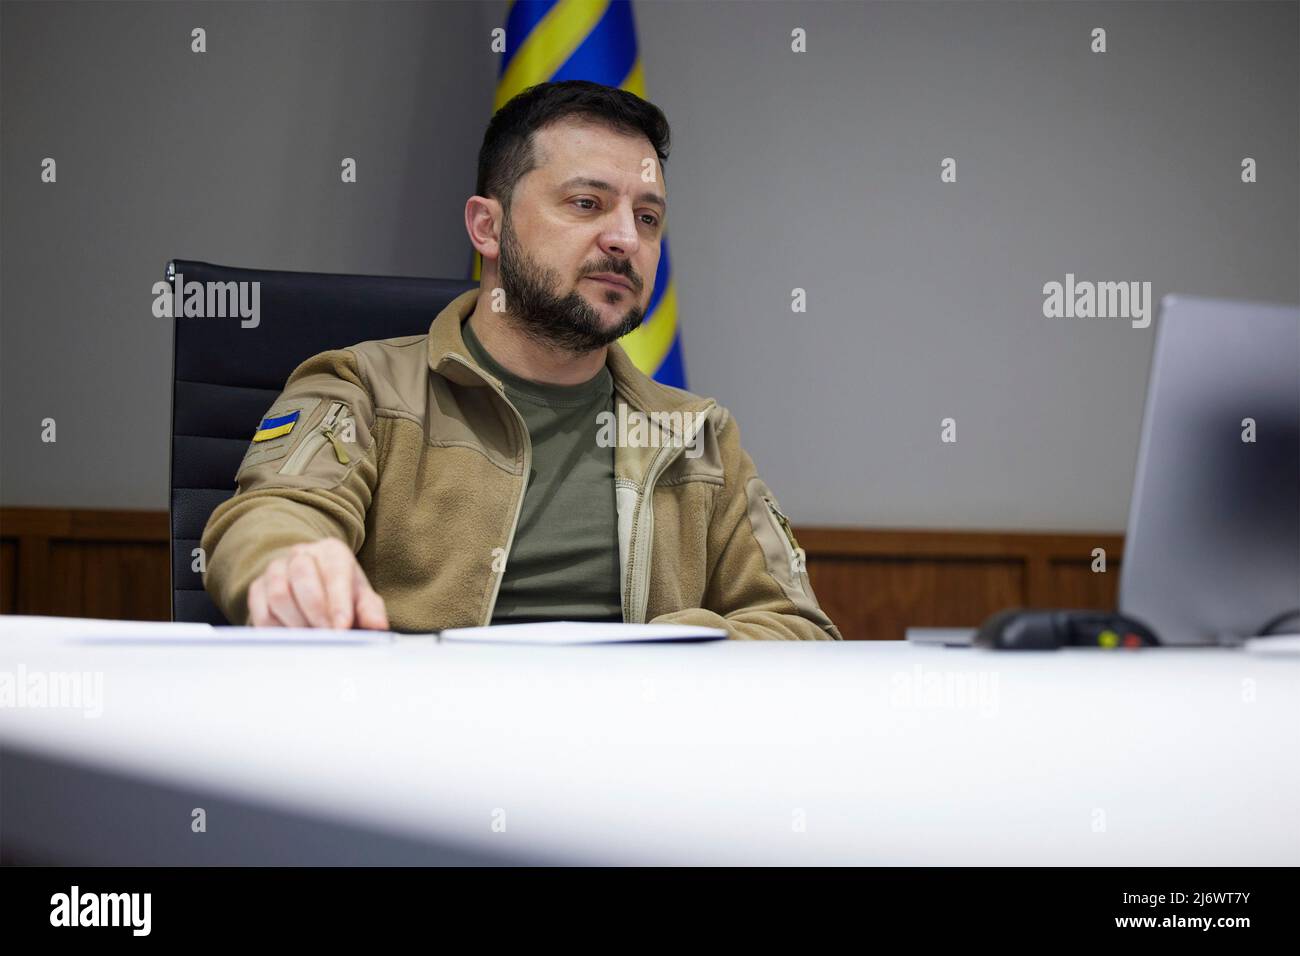 Kyiv, Ukraine. 04 May, 2022. Ukrainian President Volodymyr Zelenskyy, participates in the Wall Street Journal CEO Council Summit via video link from the situation room, May 4, 2022 in Kyiv, Ukraine.  Credit: Ukraine Presidency/Ukraine Presidency/Alamy Live News Stock Photo